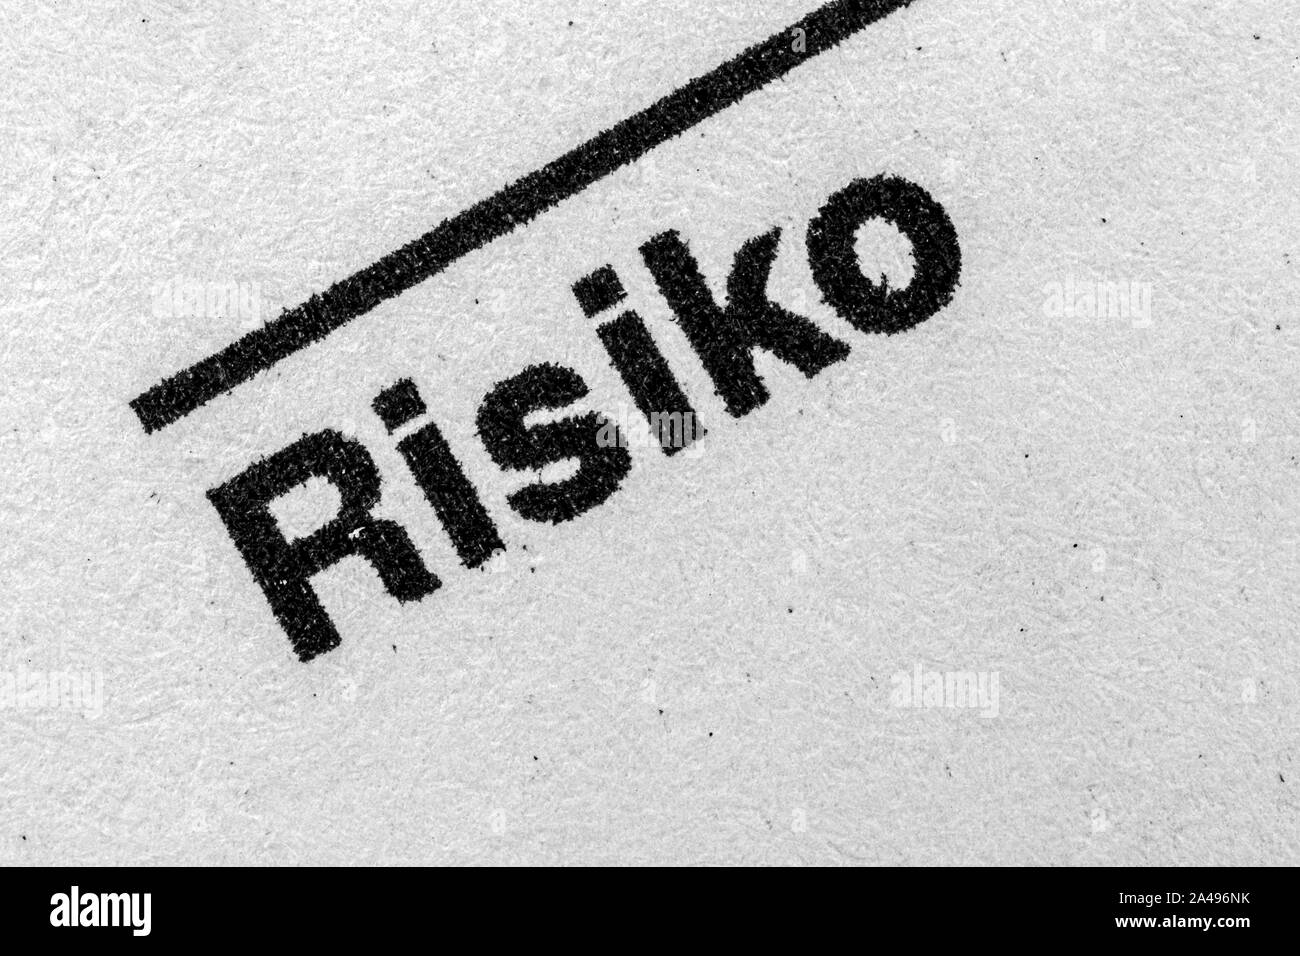 the word Risiko written in German language on white background, translation risk Stock Photo